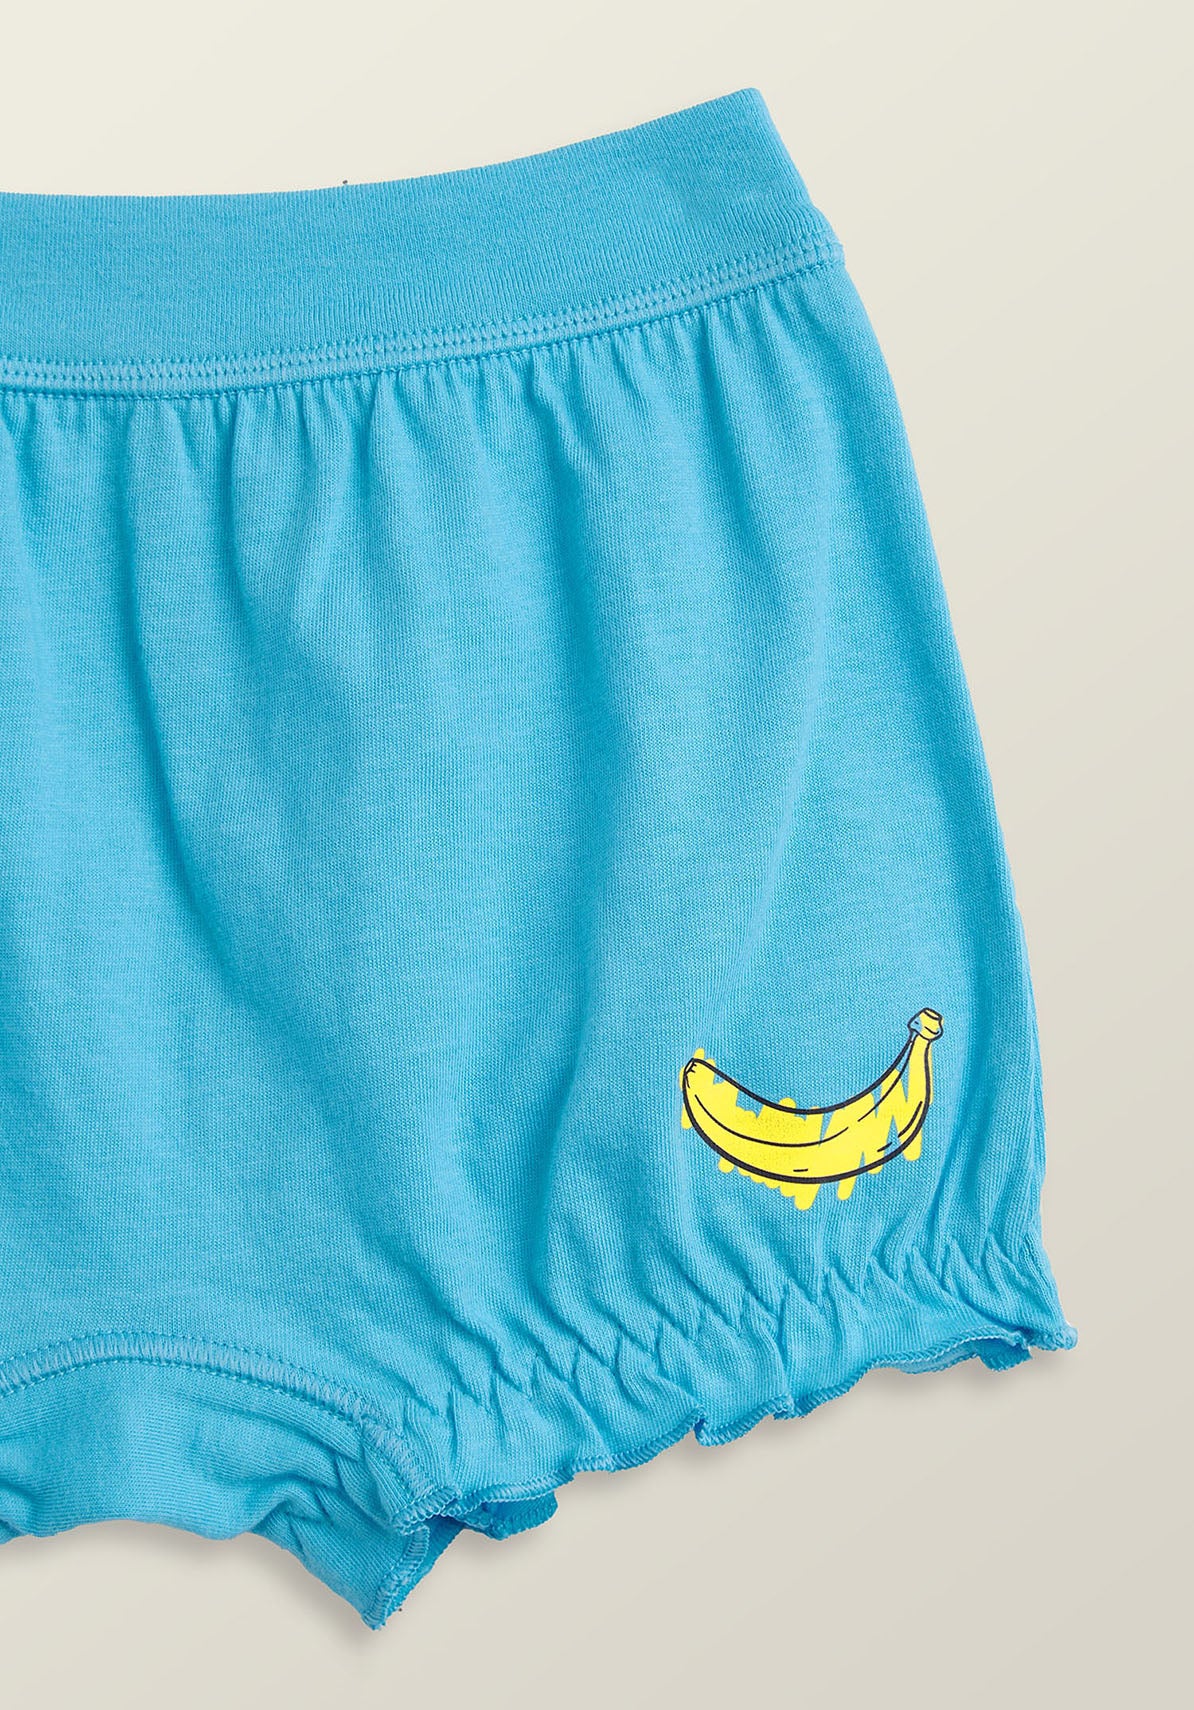 Girls bloomers scribbles banana combed cotton blue - XYLife Kids Wear